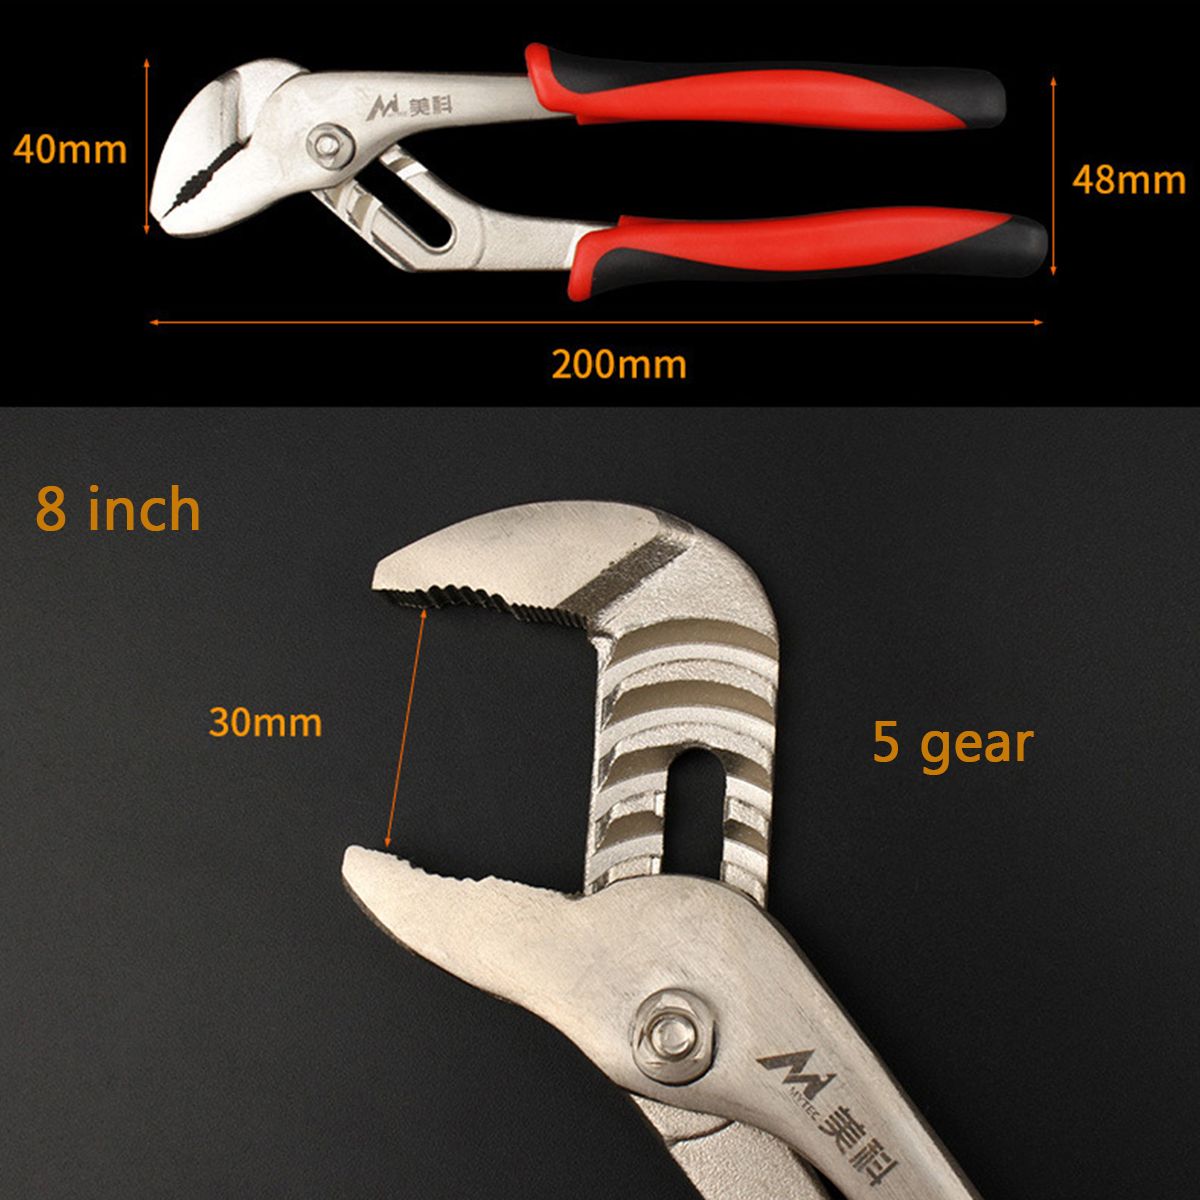 781012-Inch-Water-Pump-Pliers-Plumbers-Jaw-Pipe-Clamp-Wrench-Grips-Hand-Tool-1447009